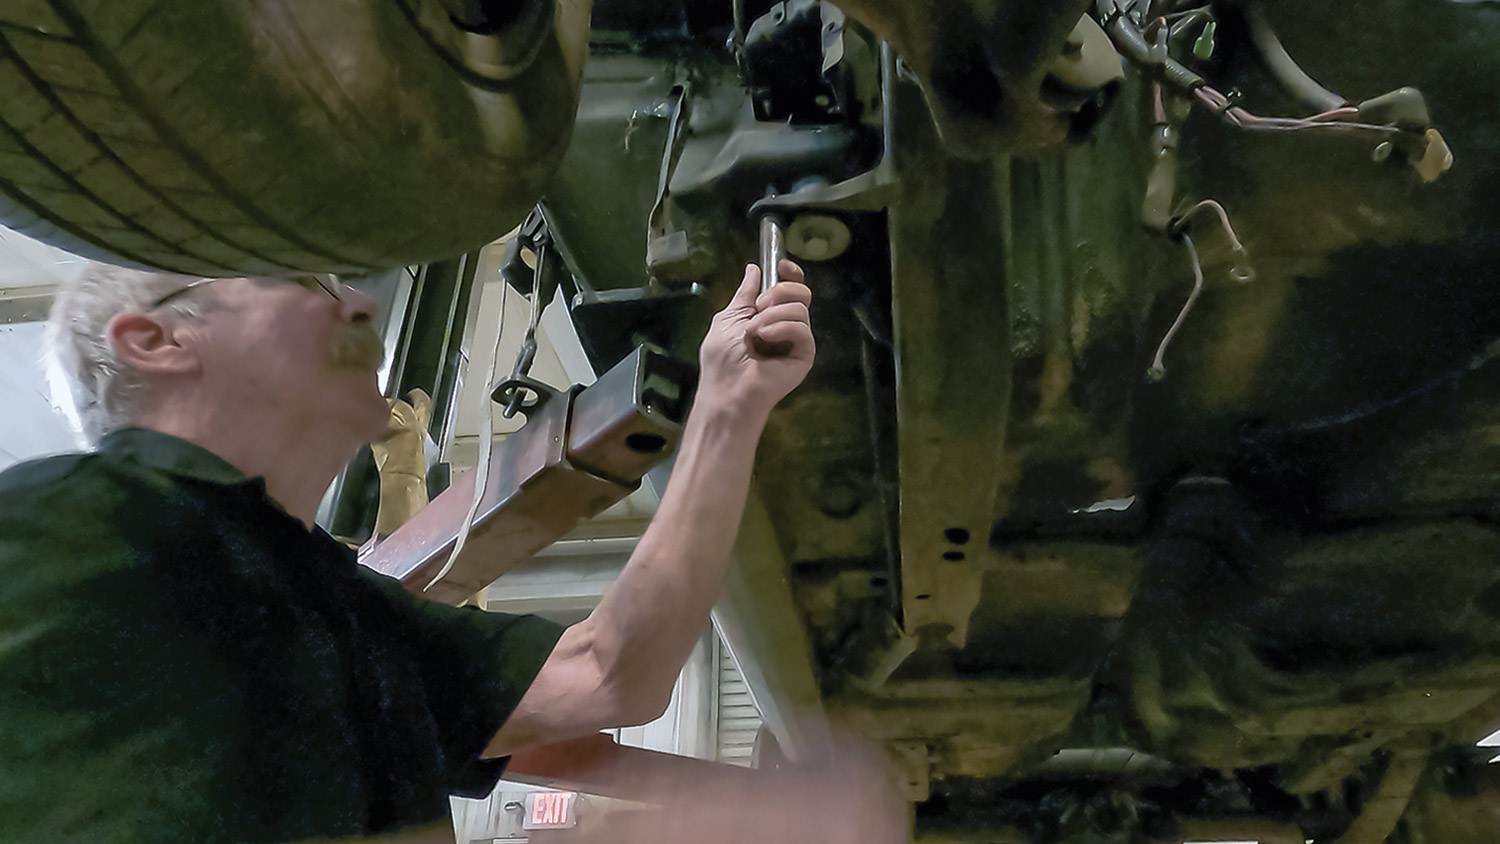 mechanic uses locator pins to work on the subframe from beneath the lifted car